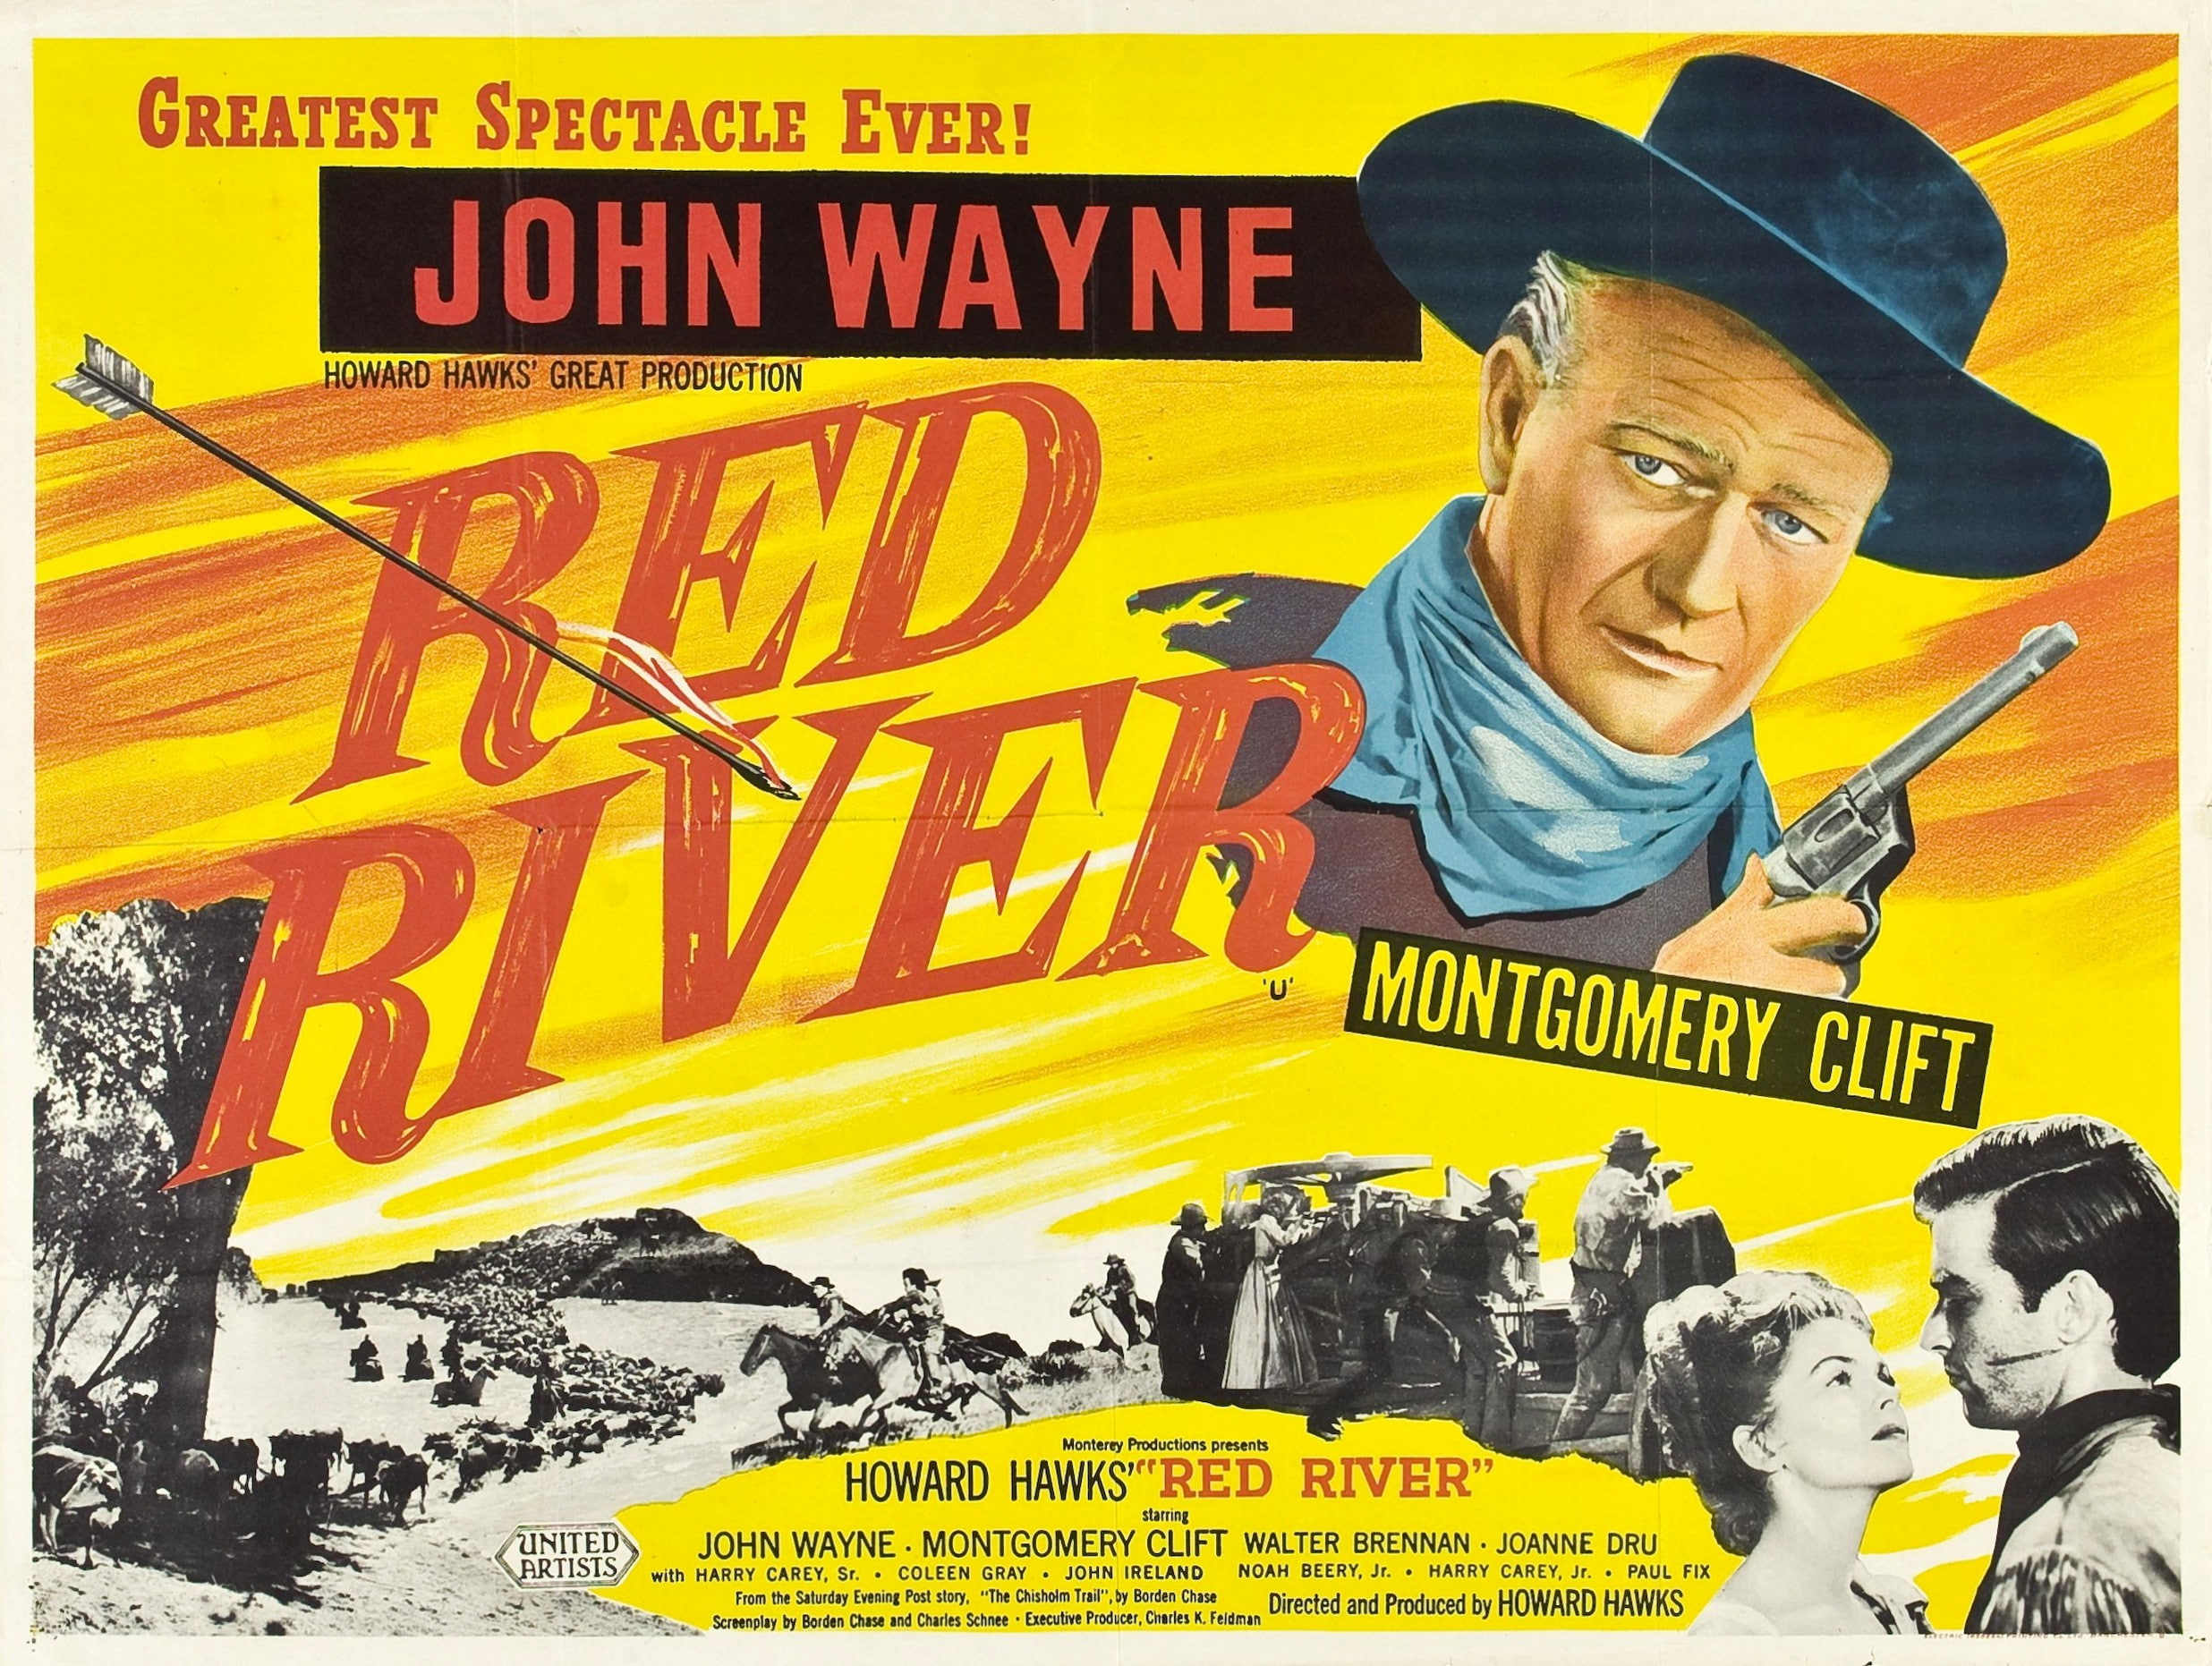 Film Posters, Howard Hawks, John Wayne, Red River, text, one person